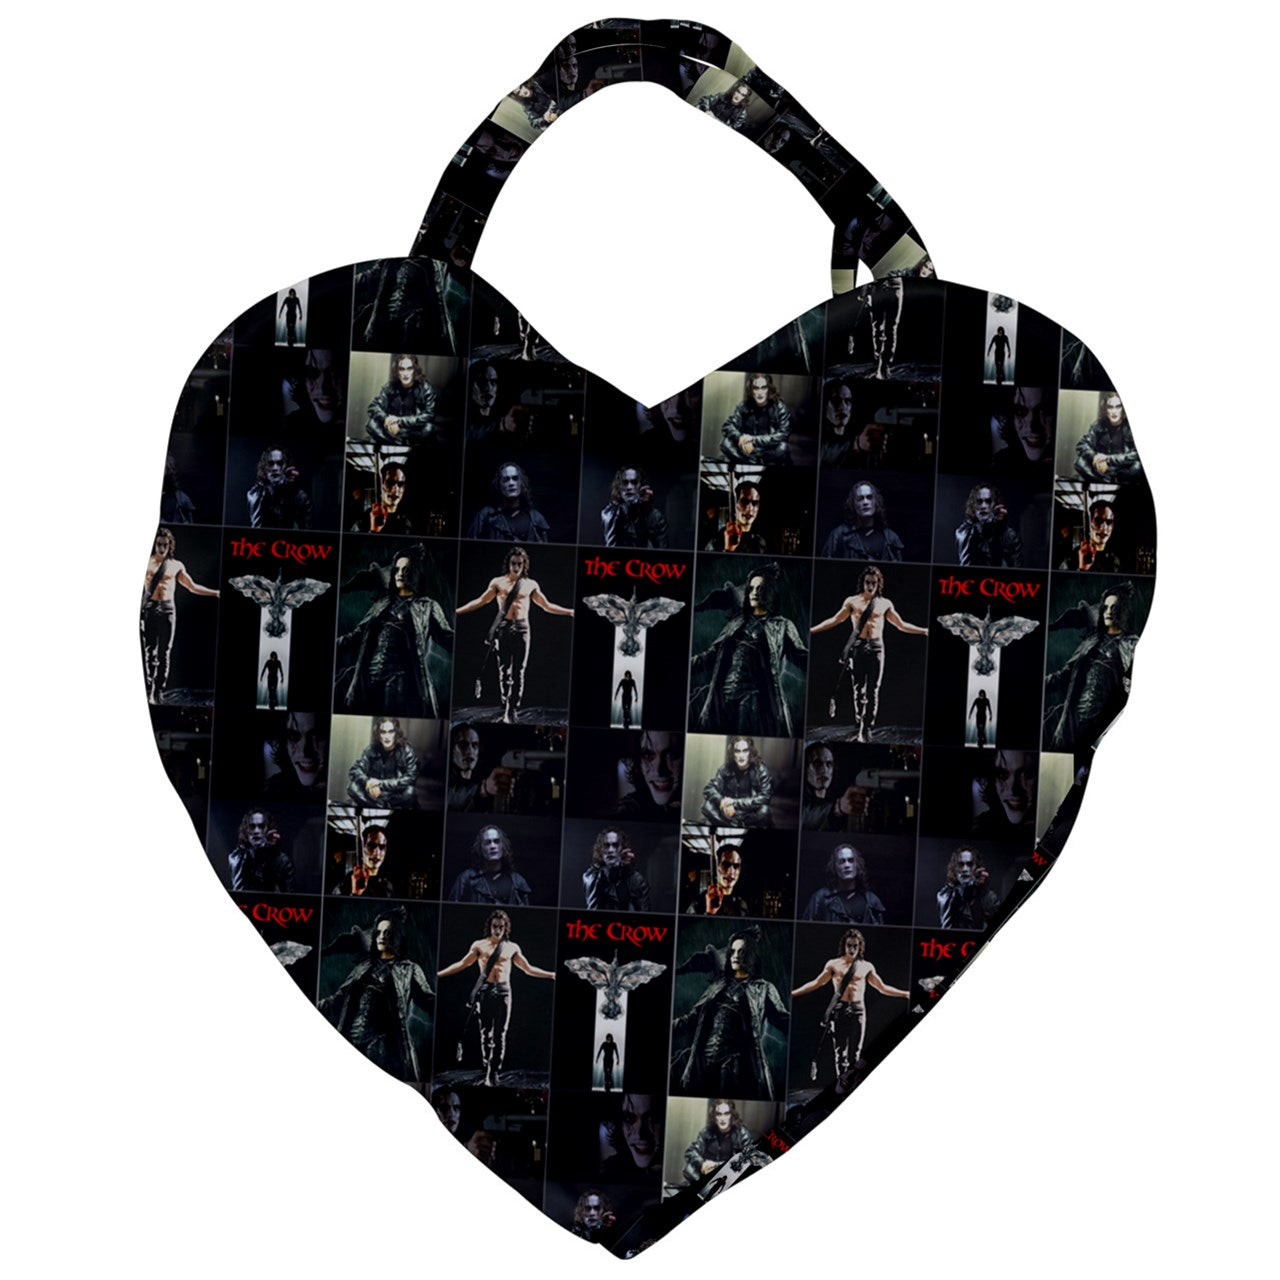 The Crow Giant Heart Shaped Tote